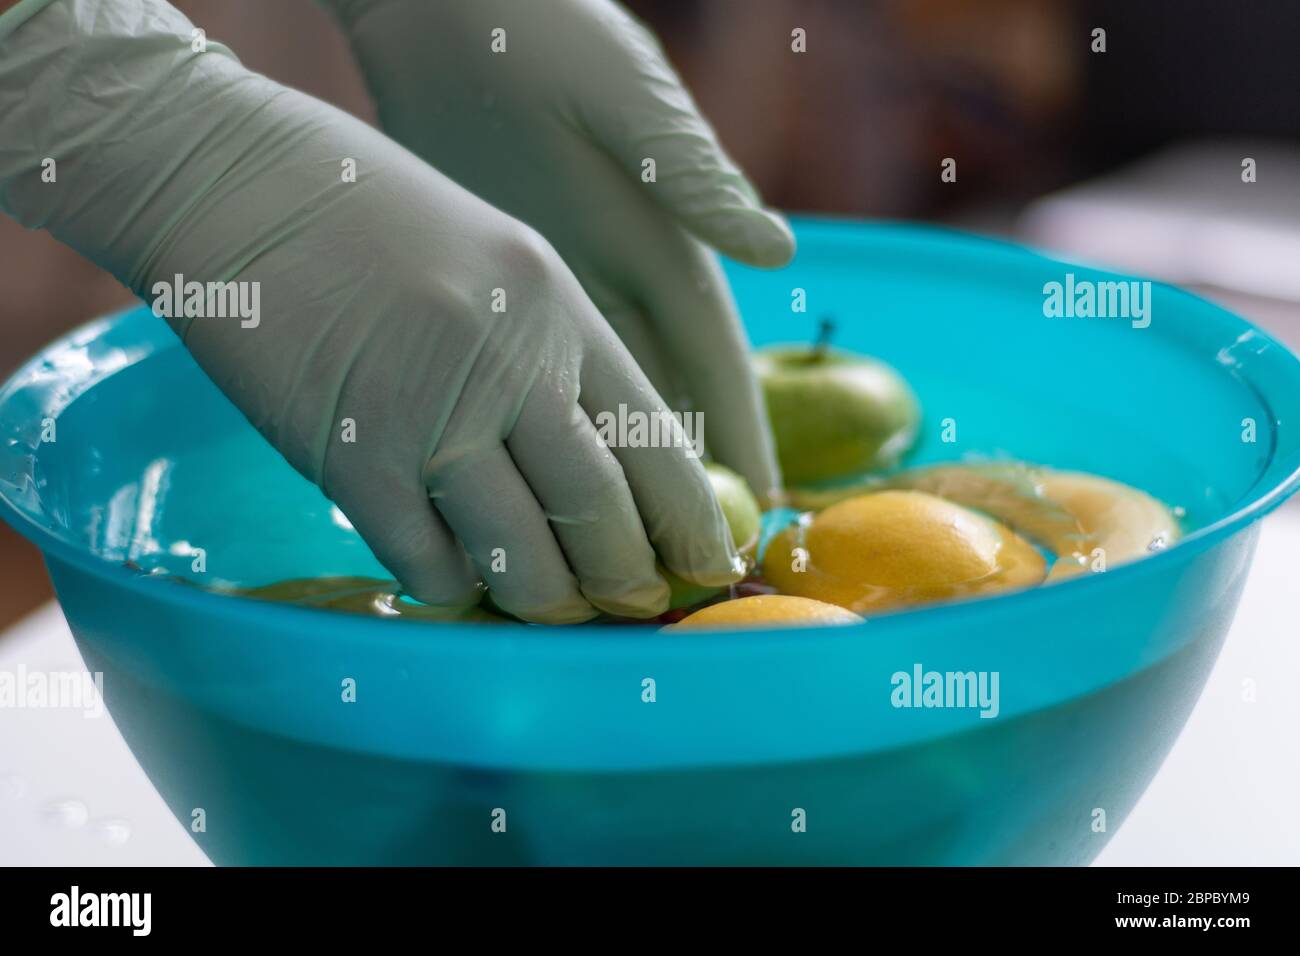 Washing fruits in a bowl with plastic gloves. Fruits are placed on water in a green bowl for cleaning after shopping. Stock Photo